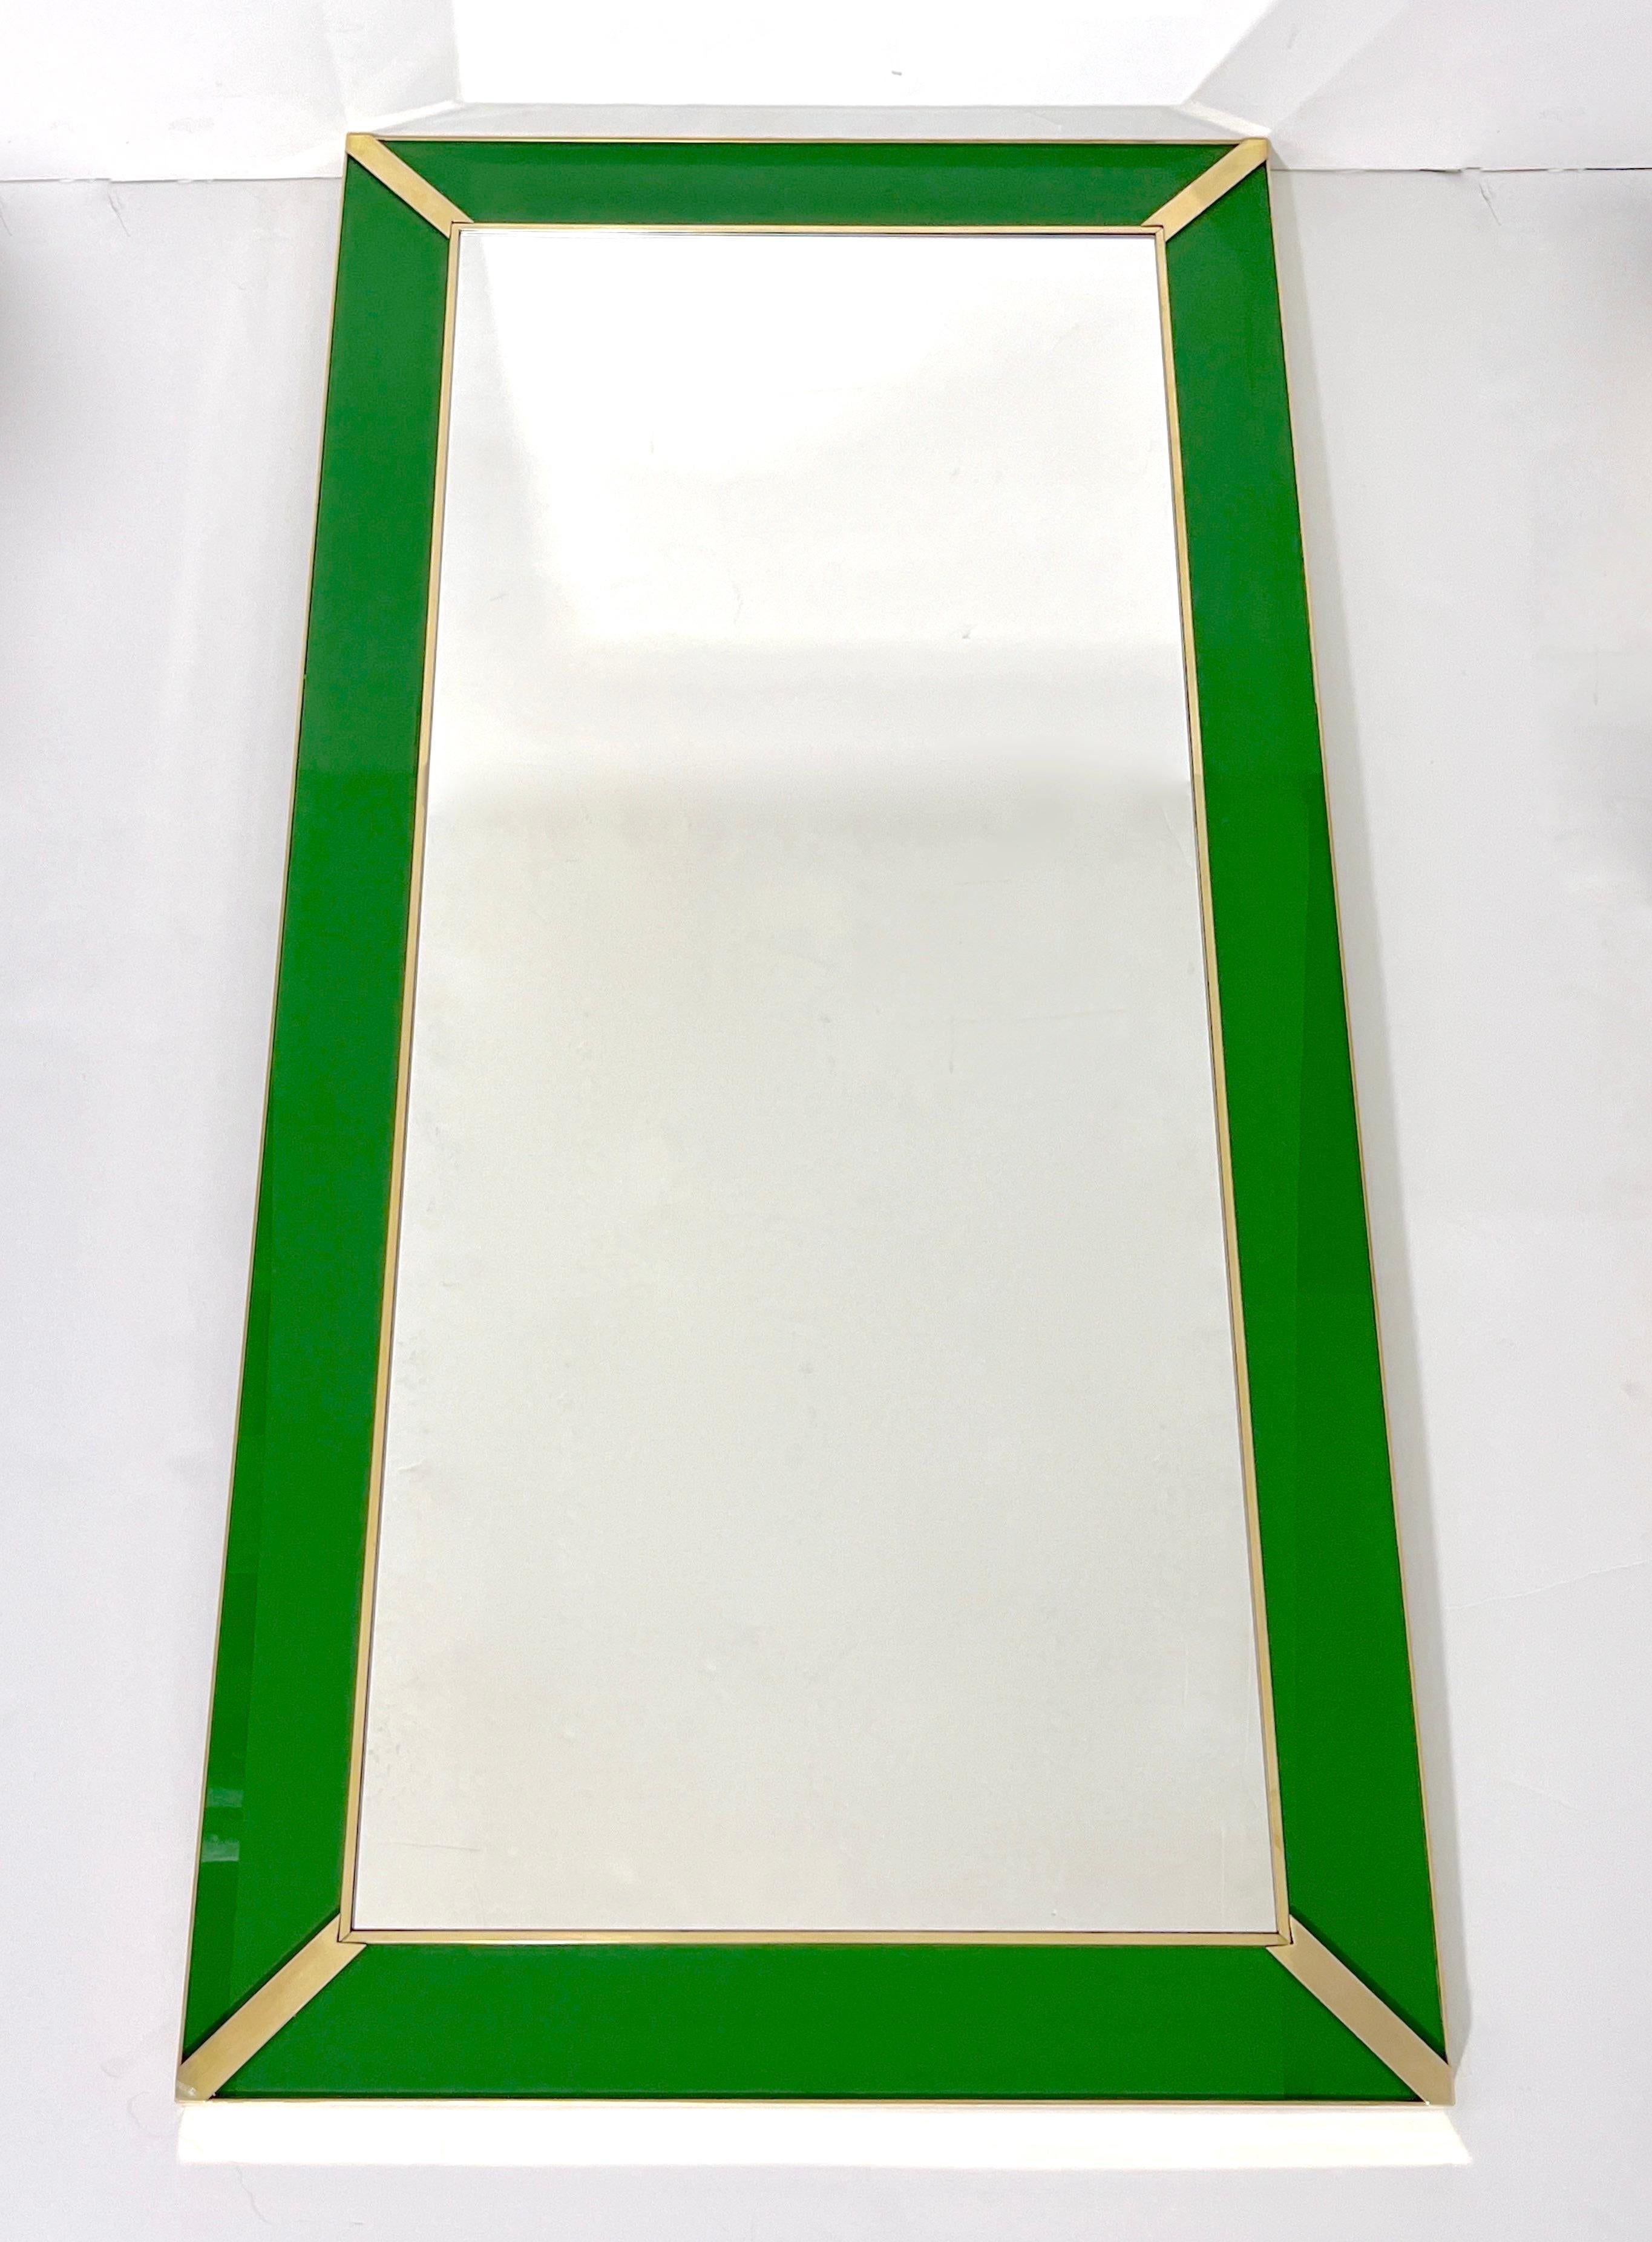 Contemporary Italian Minimalist Design Green Glass Mirror with Brass Accents For Sale 2